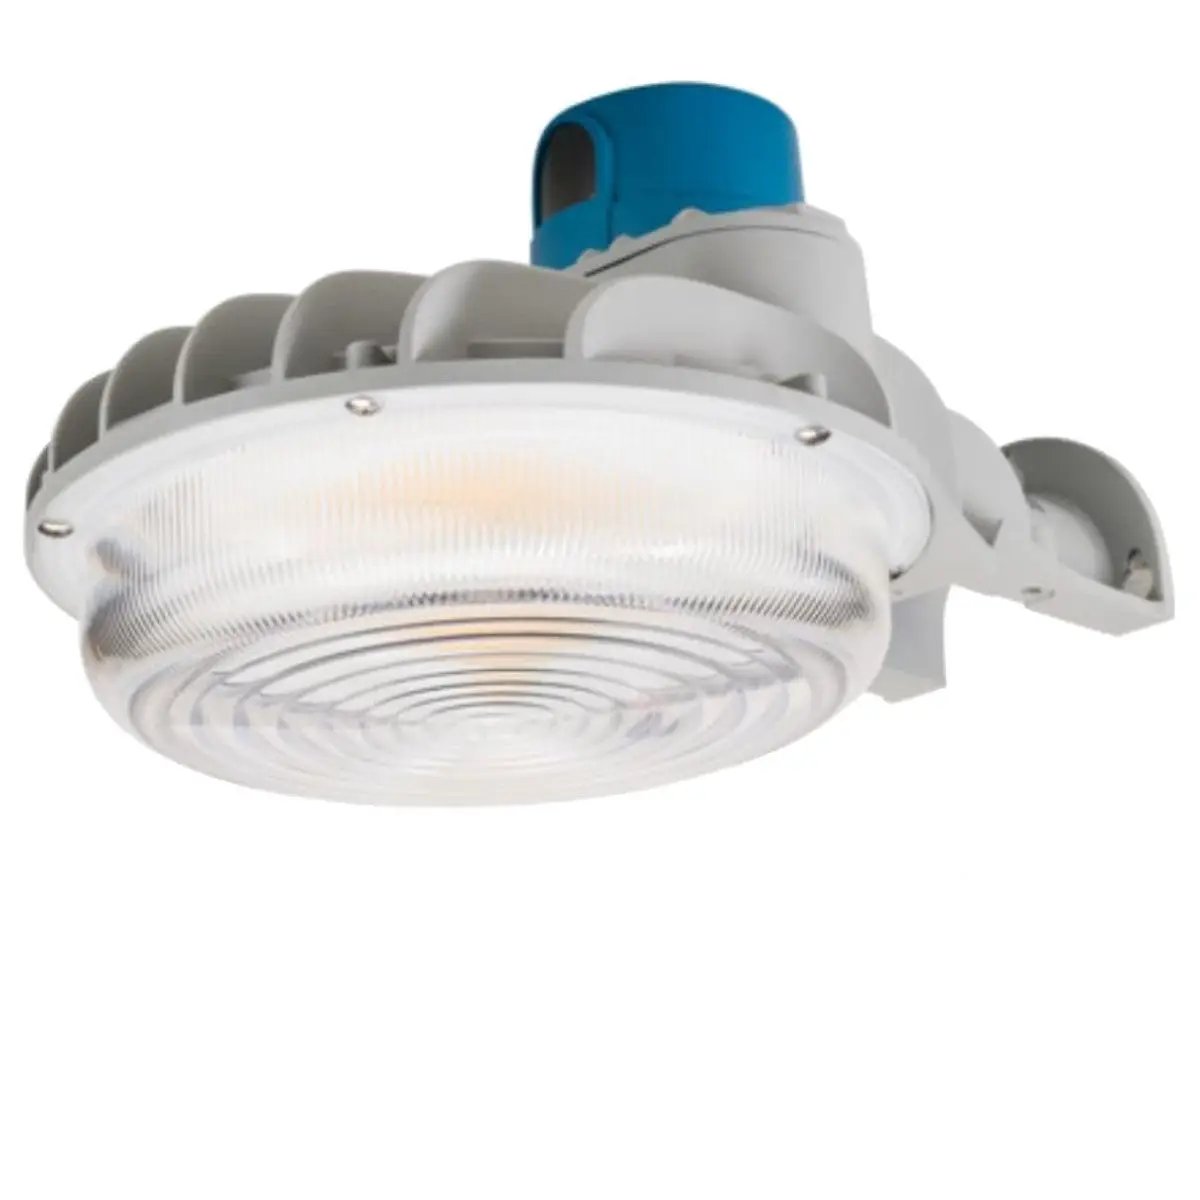 LED Dusk to Dawn Light: A versatile, energy-saving outdoor fixture by Keystone Technologies. Provides 5200-9250 lumens of CCT selectable lighting. Dimmable and motion sensor optional. UL Listed, RoHS Compliant, IP65 Rated, DLC Premium Listed. 13.62"L x 9.13"W x 7.36"H. 5-year warranty.